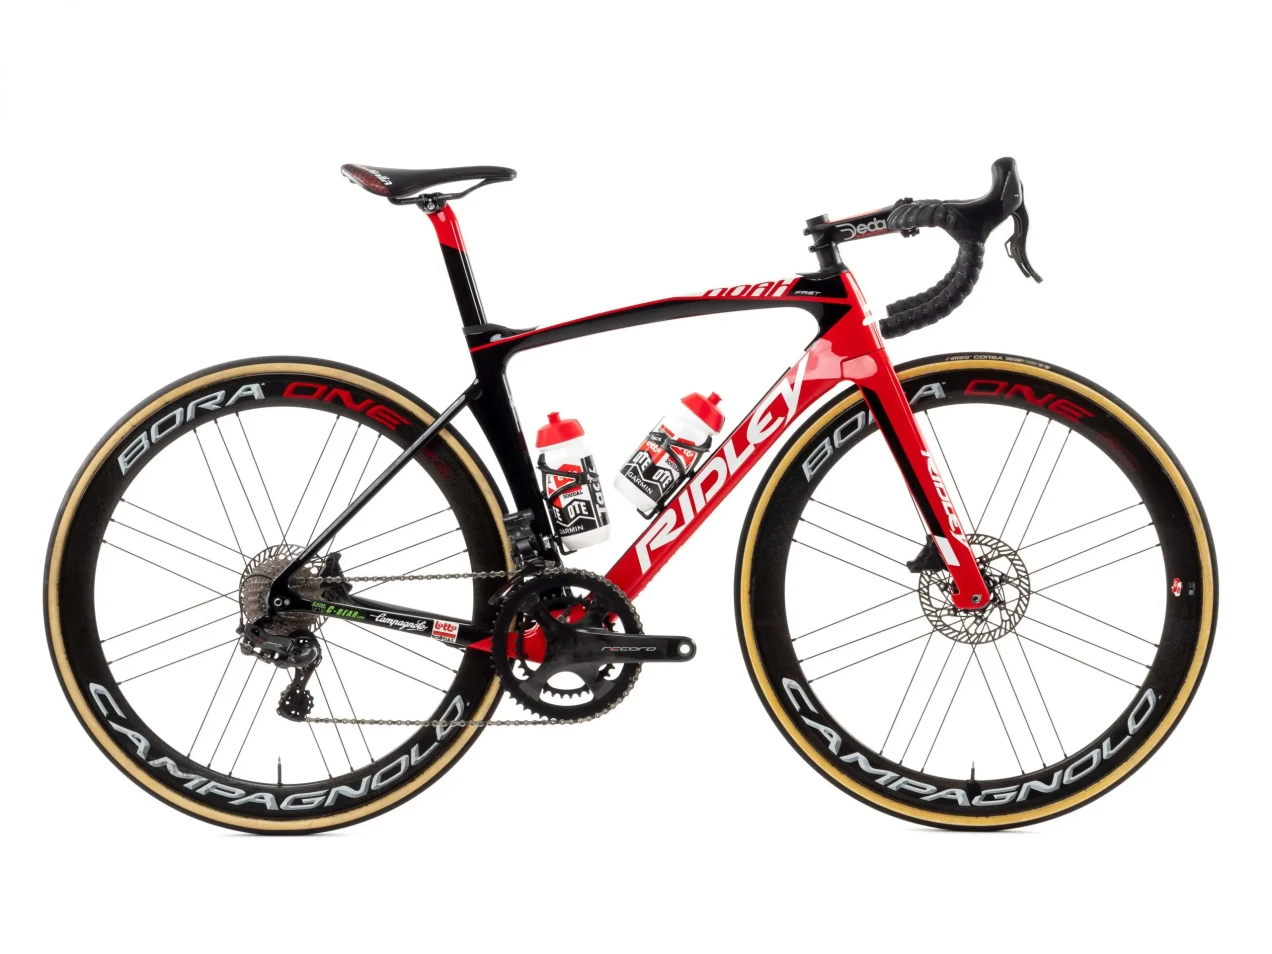 Classificatie dun ontslaan Ridley Ridley Noah Fast Disc 2020 Team Lotto Soudal size 51 - Campagnolo  Super Record EPS 12s gebruikt in 51 cm | buycycle